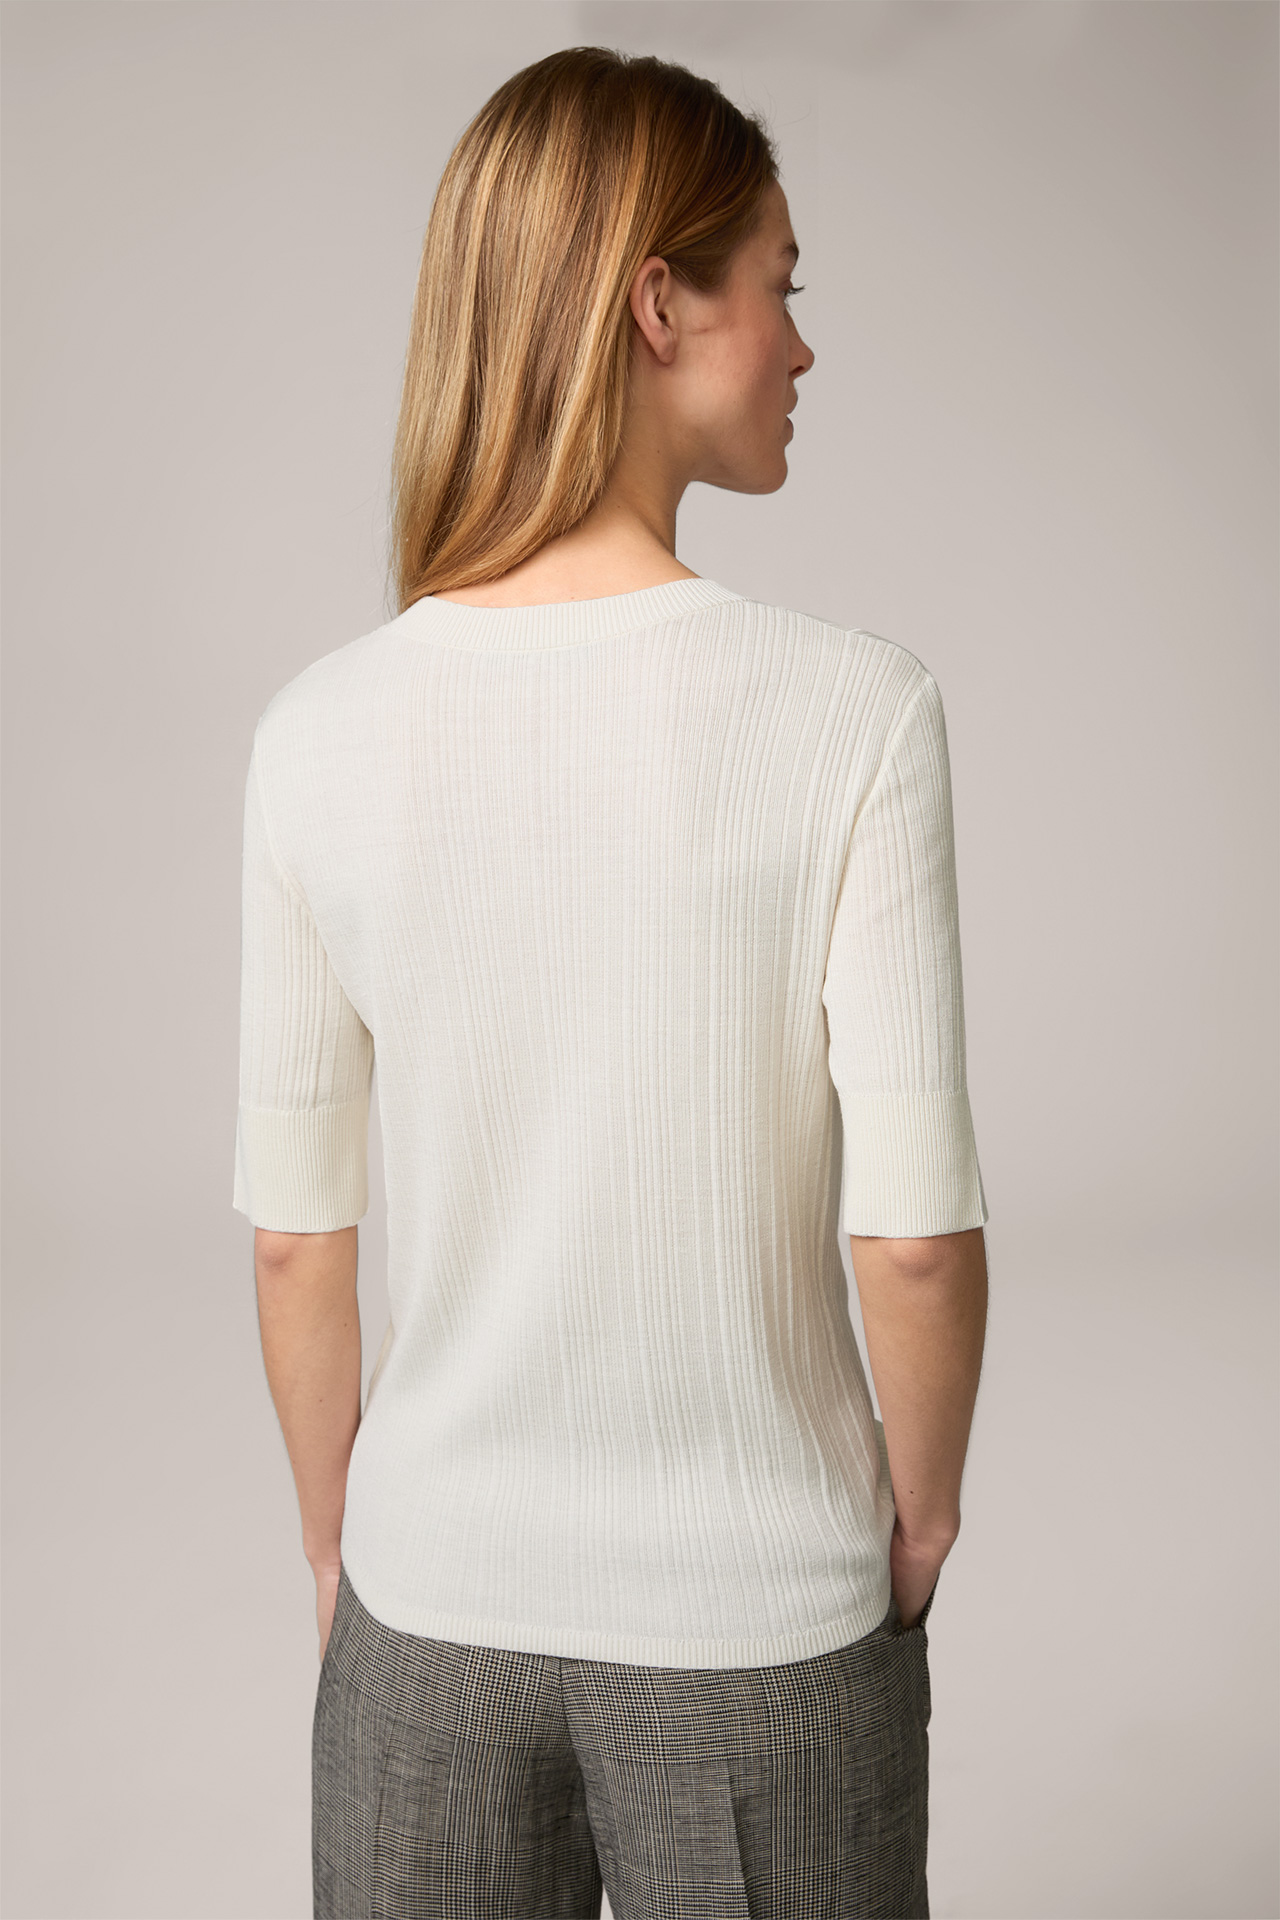 Silk/Cotton Blend Ribbed Knitted T-shirt in Cream